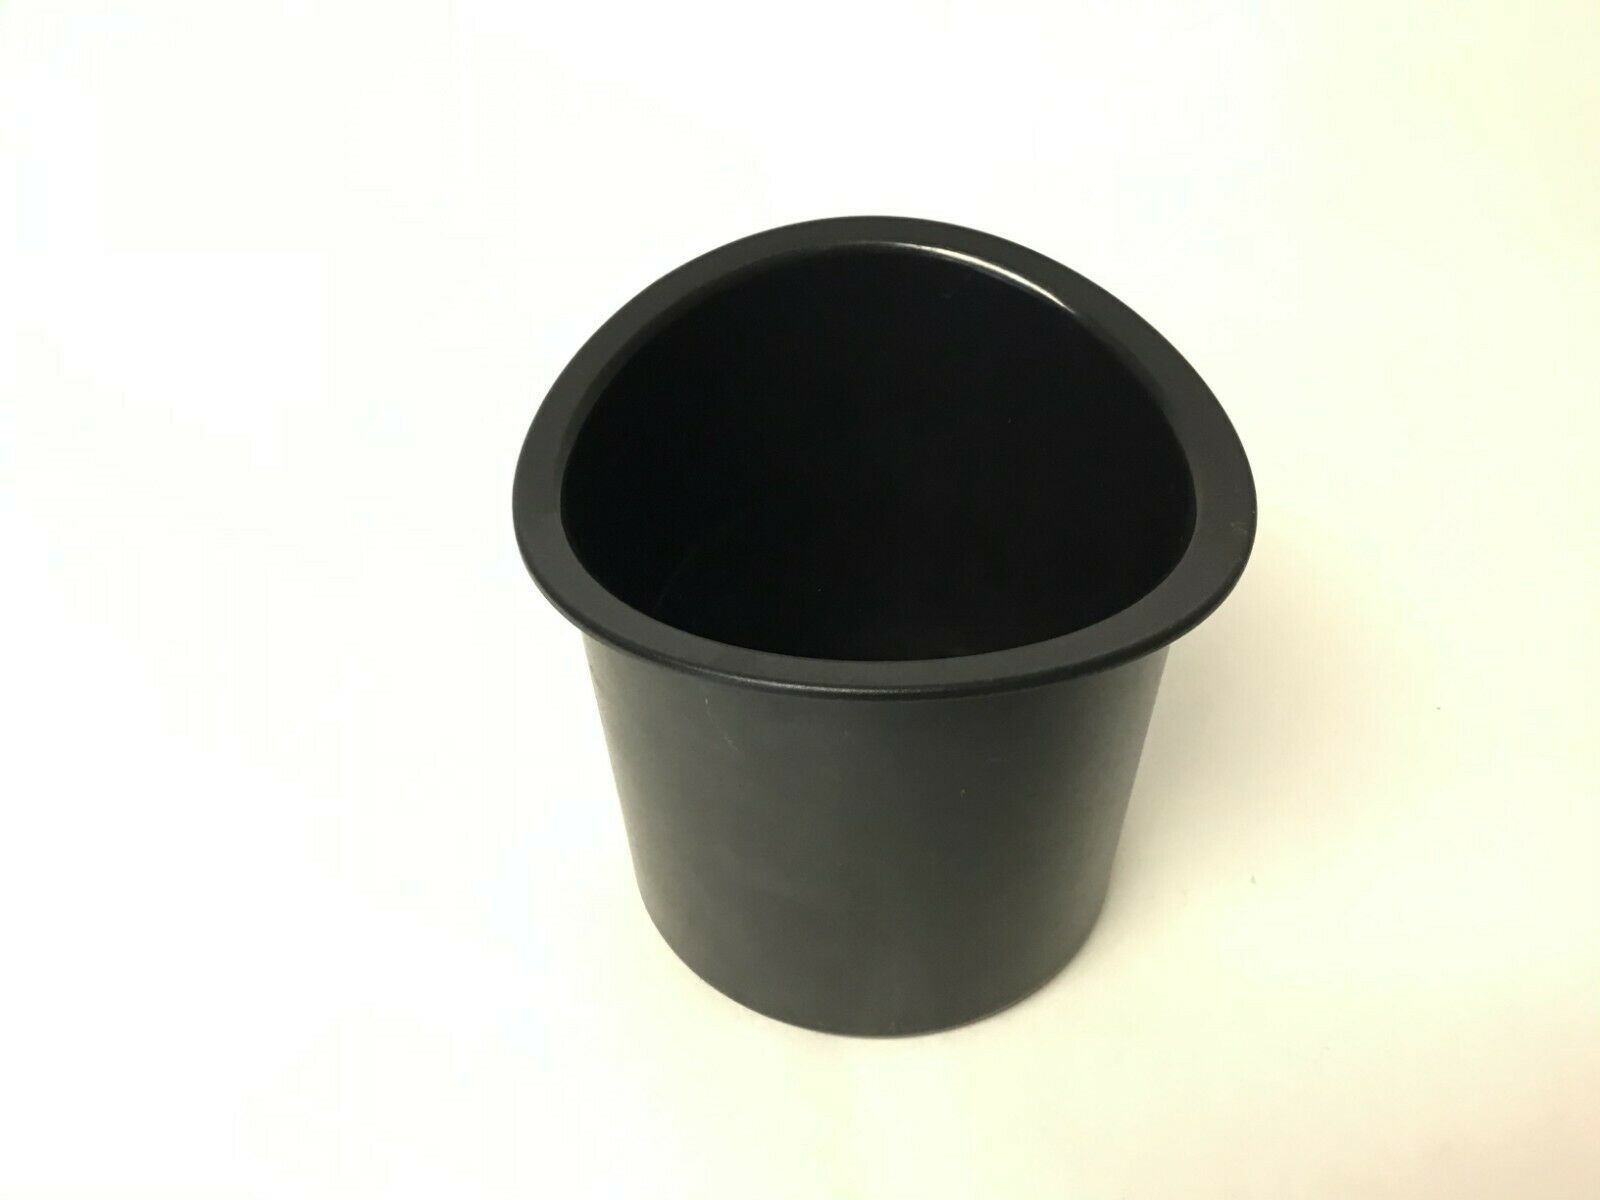 Cup Holder Accessory 7UCS0010 (Used)